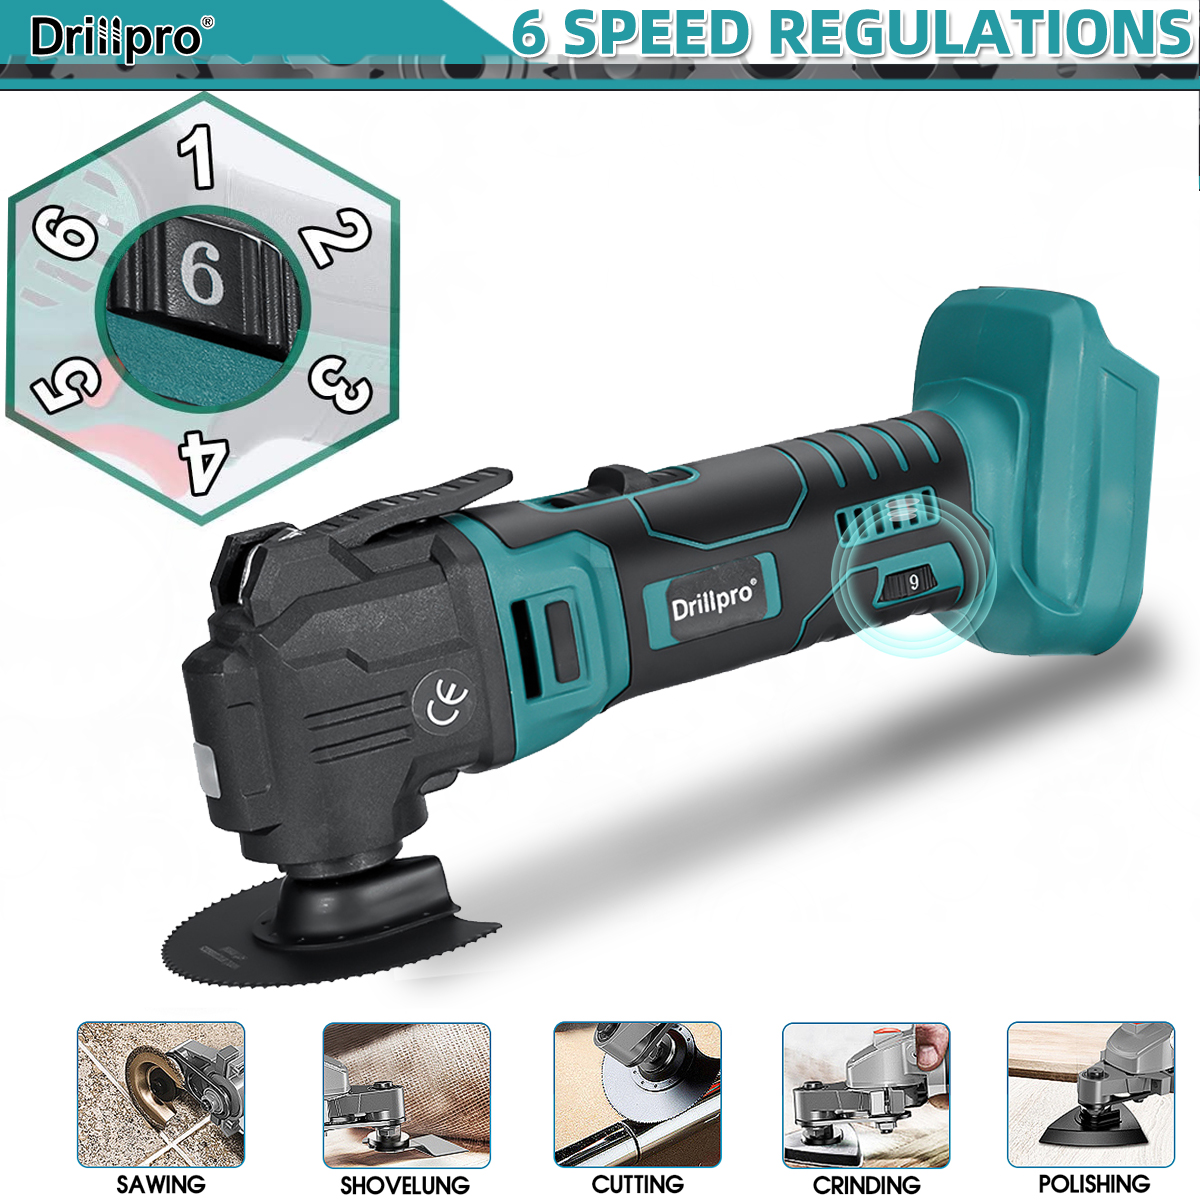 Drillpro-Electric-Cordless-Oscillating-Multi-Tool-Bare-Metal-Machine-Without-Battery-with-Plastic-Bo-1957681-4